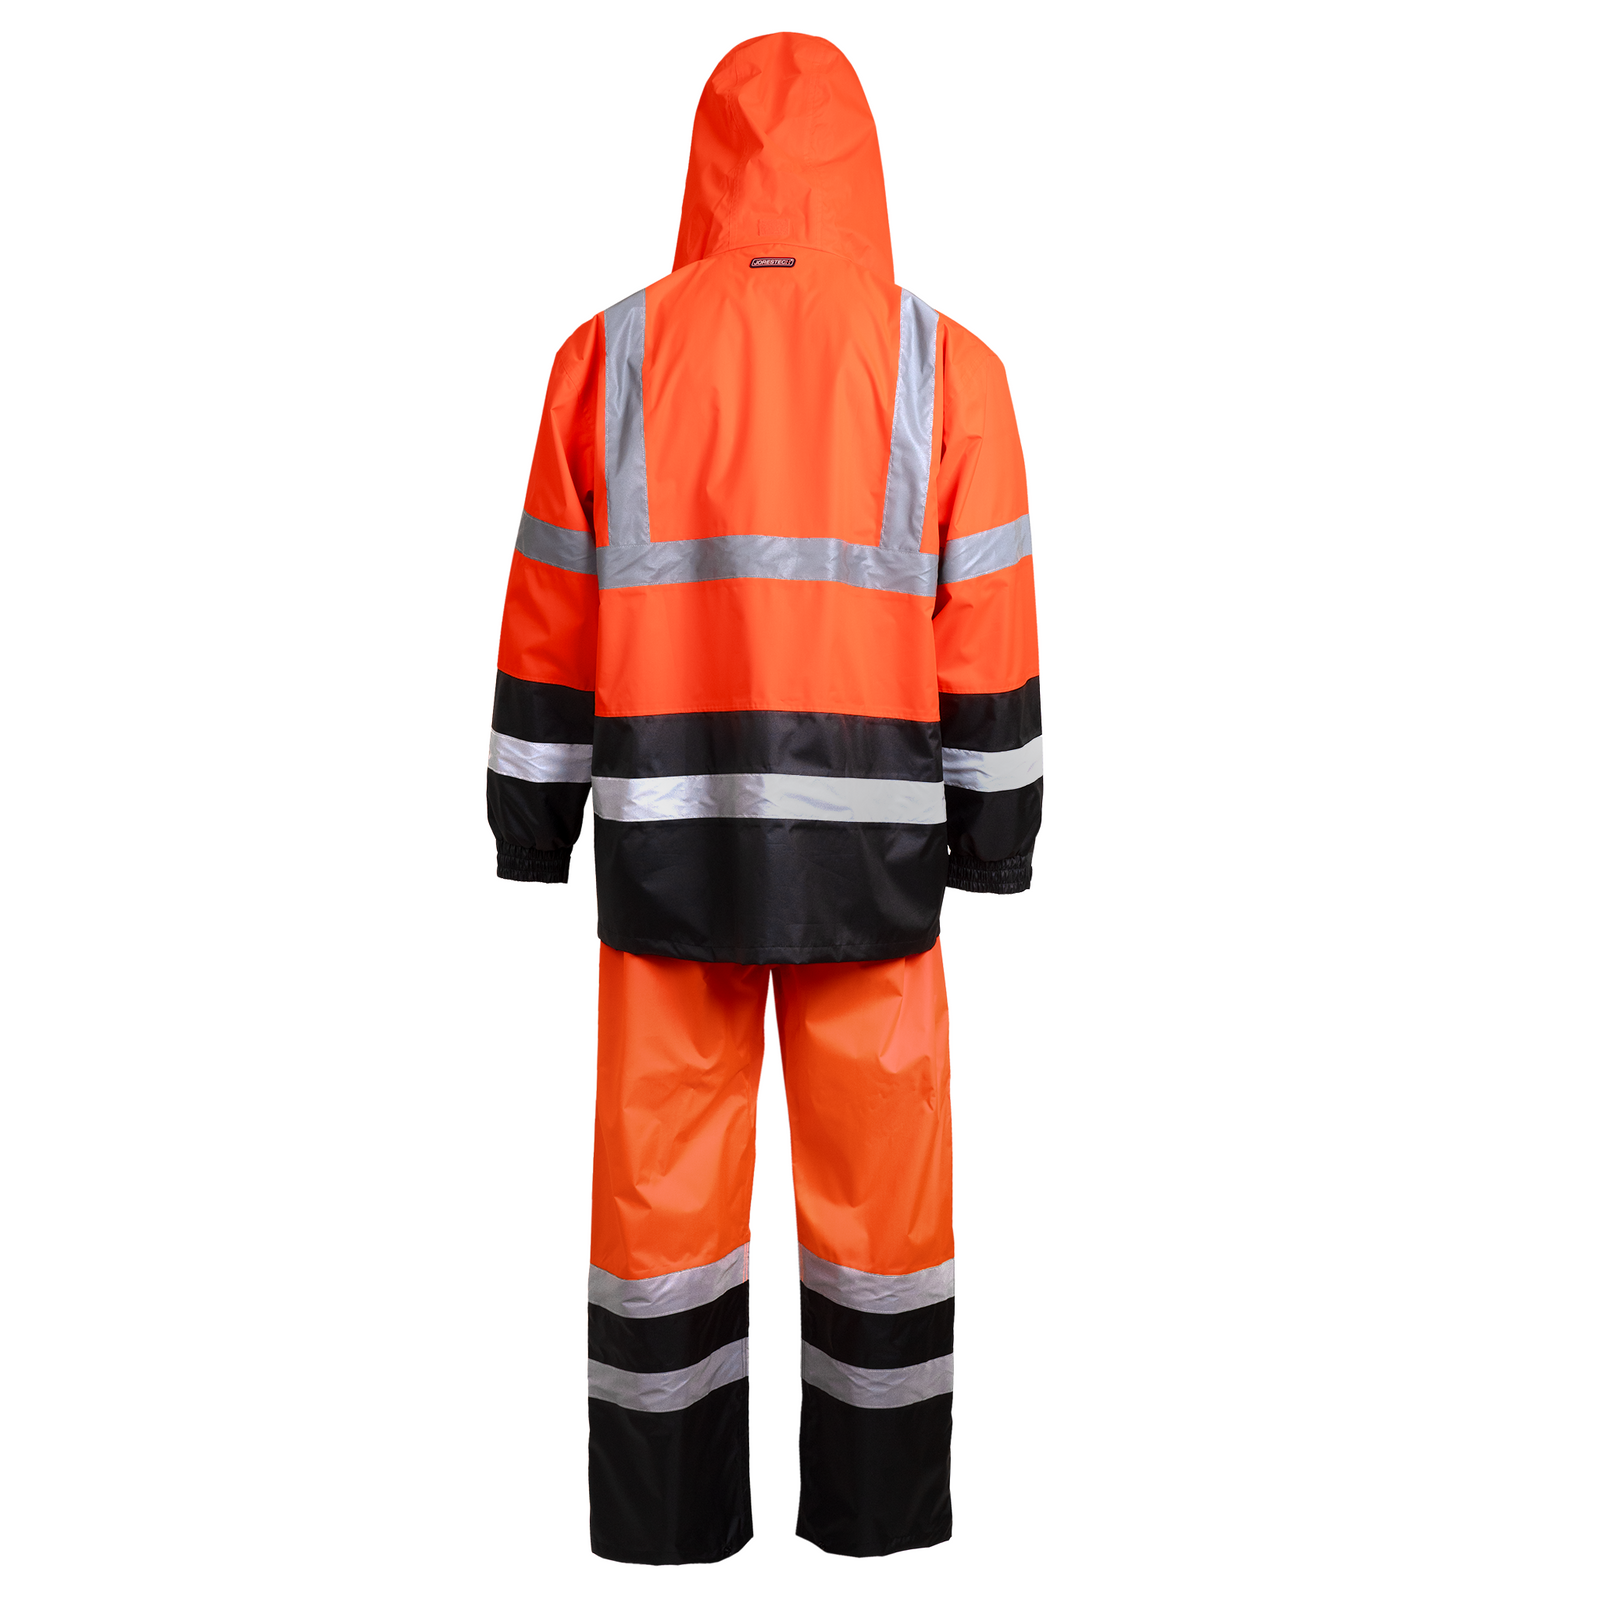 High Visibility Orange and Black Safety rain set with 2 inches reflective stripes